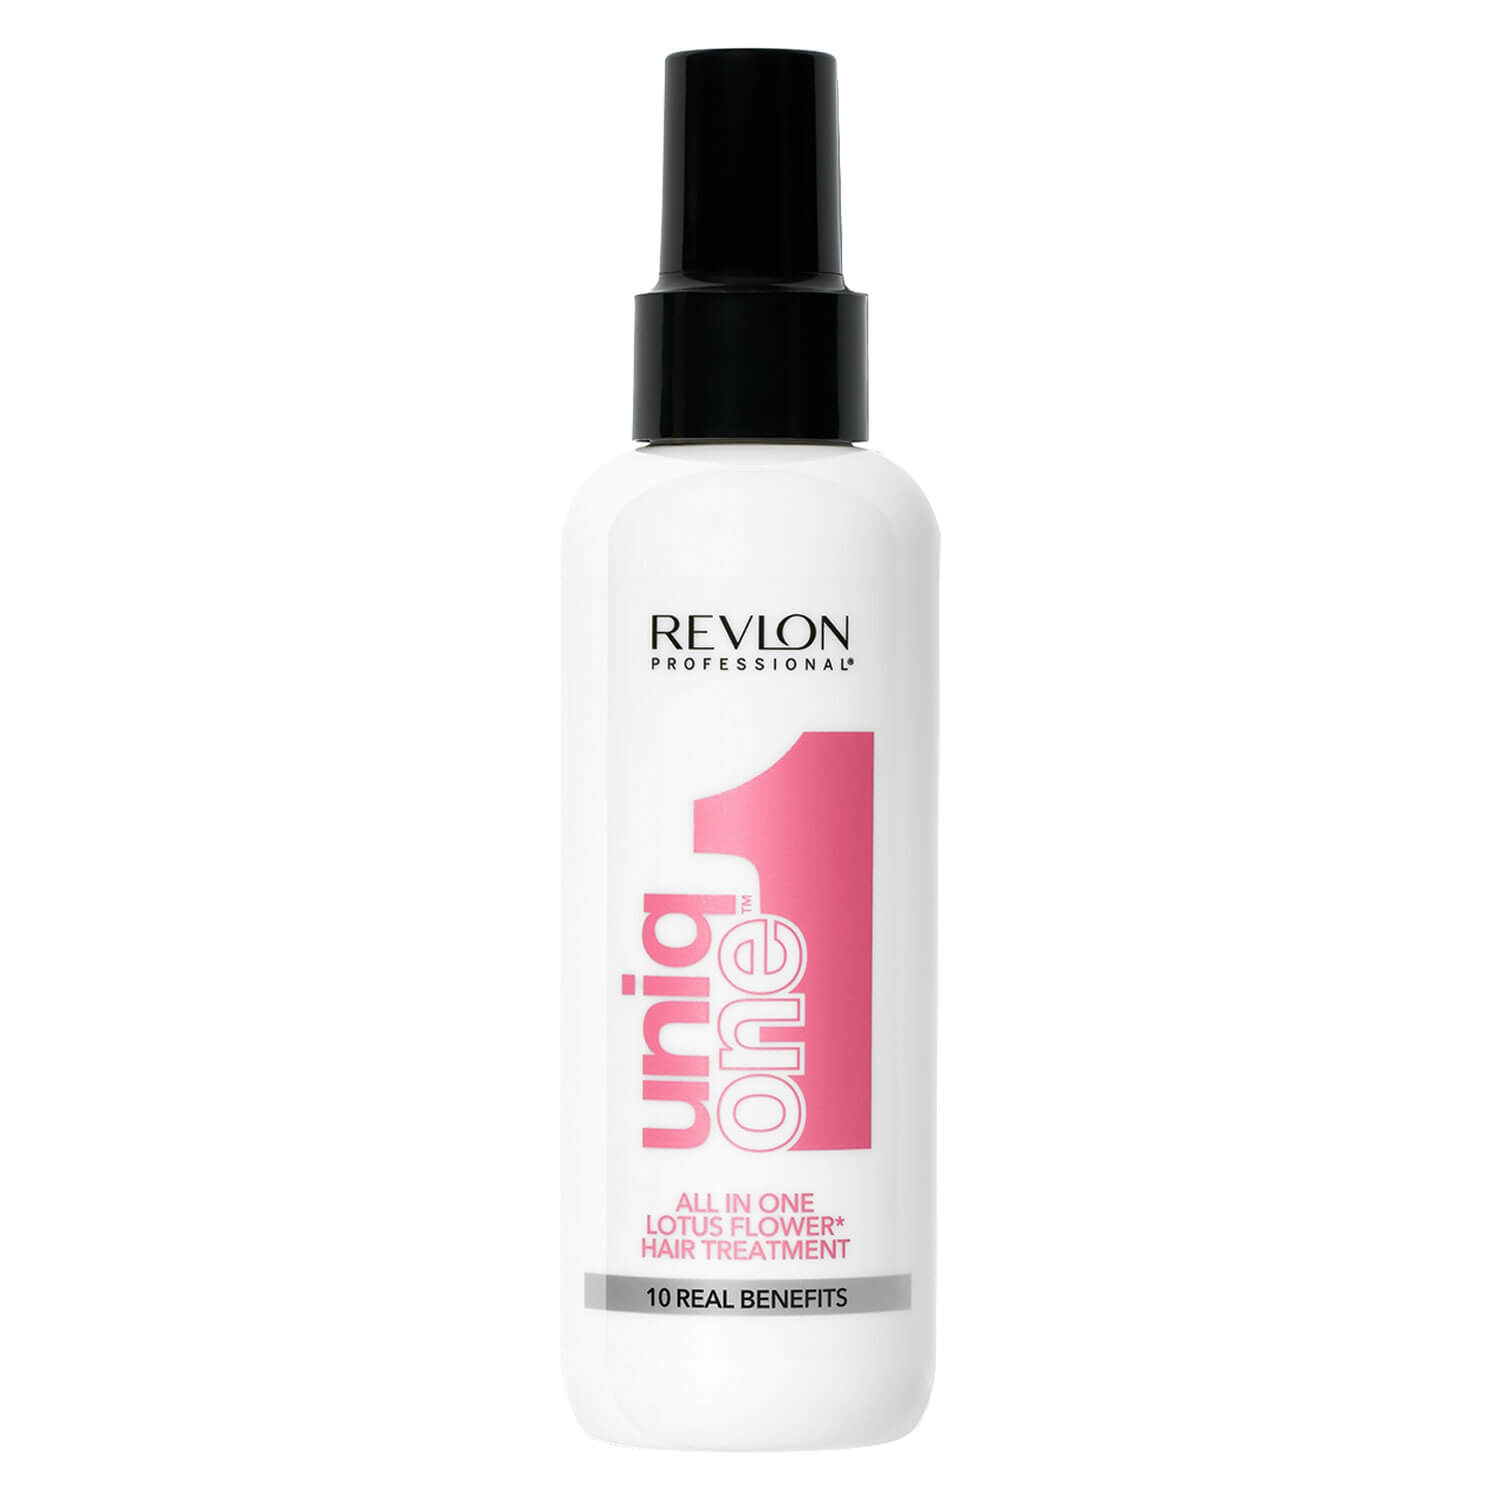 Product image from uniq one - All in one Hair Treatment Lotus Flower